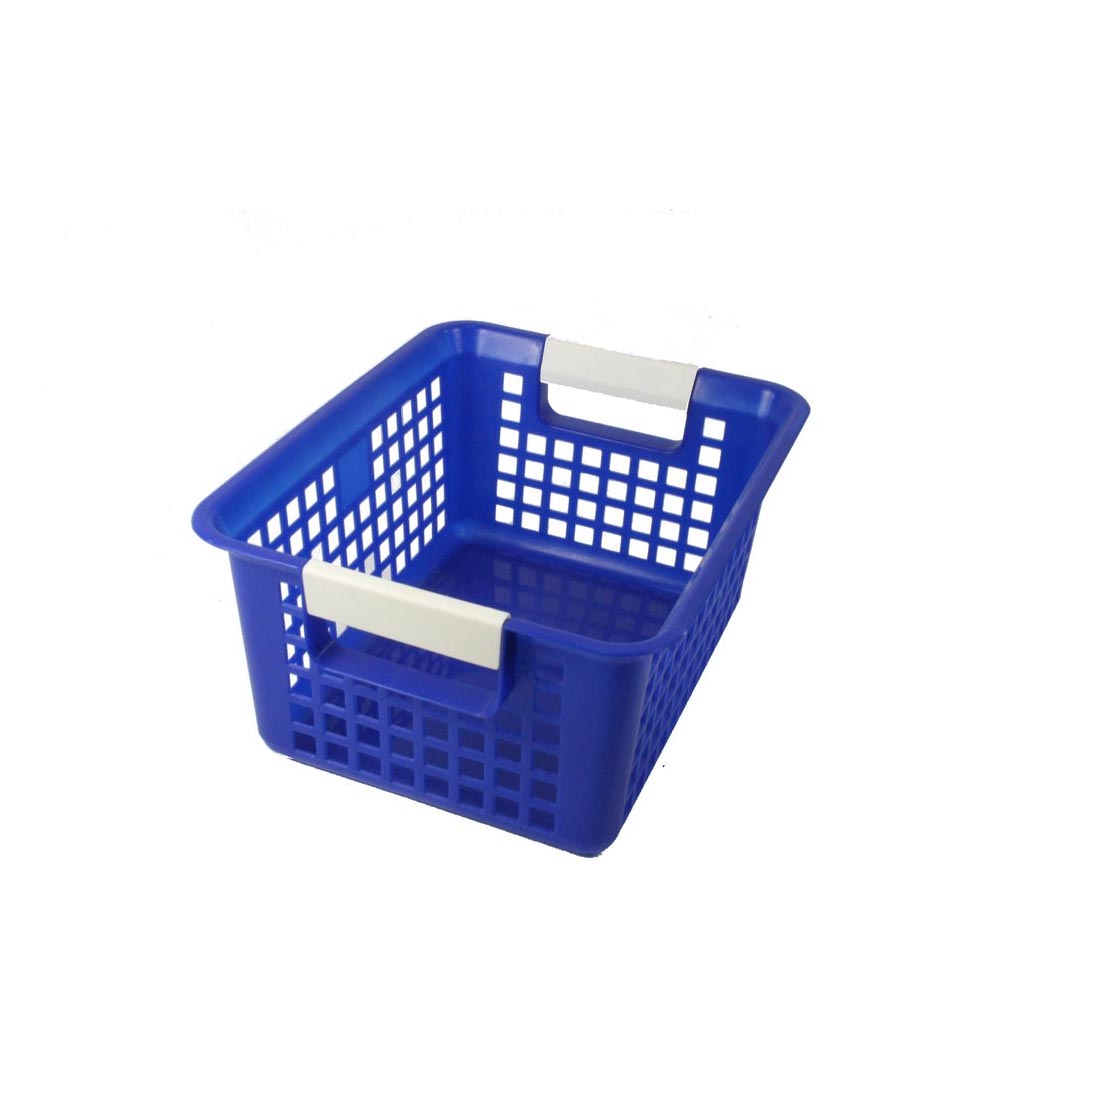 Romanoff Products Blue Book Basket